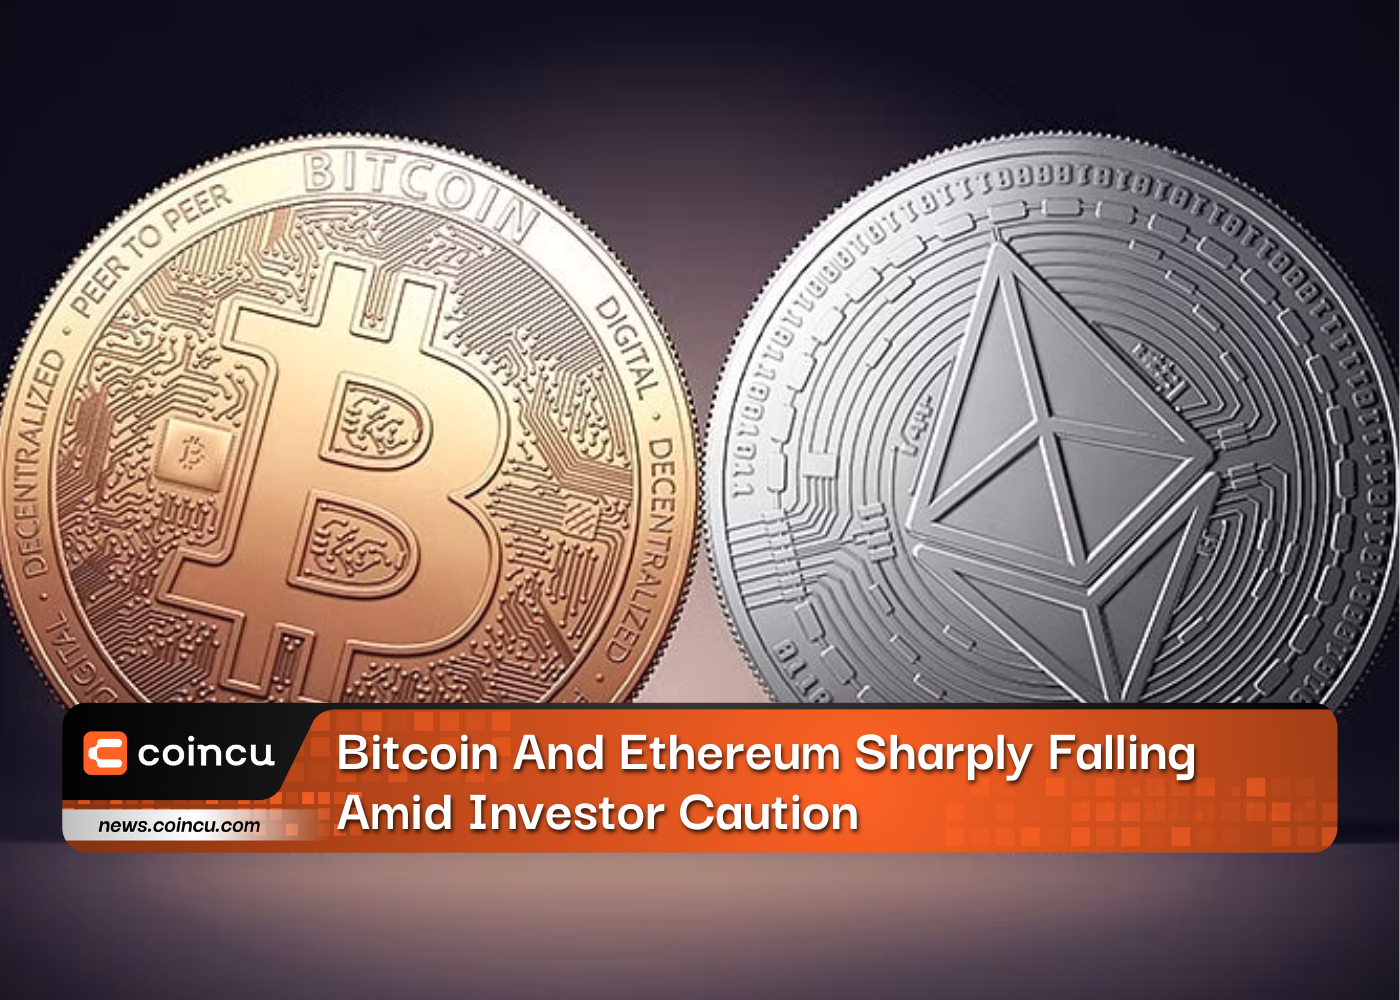 Bitcoin And Ethereum Sharply Falling Amid Investor Caution